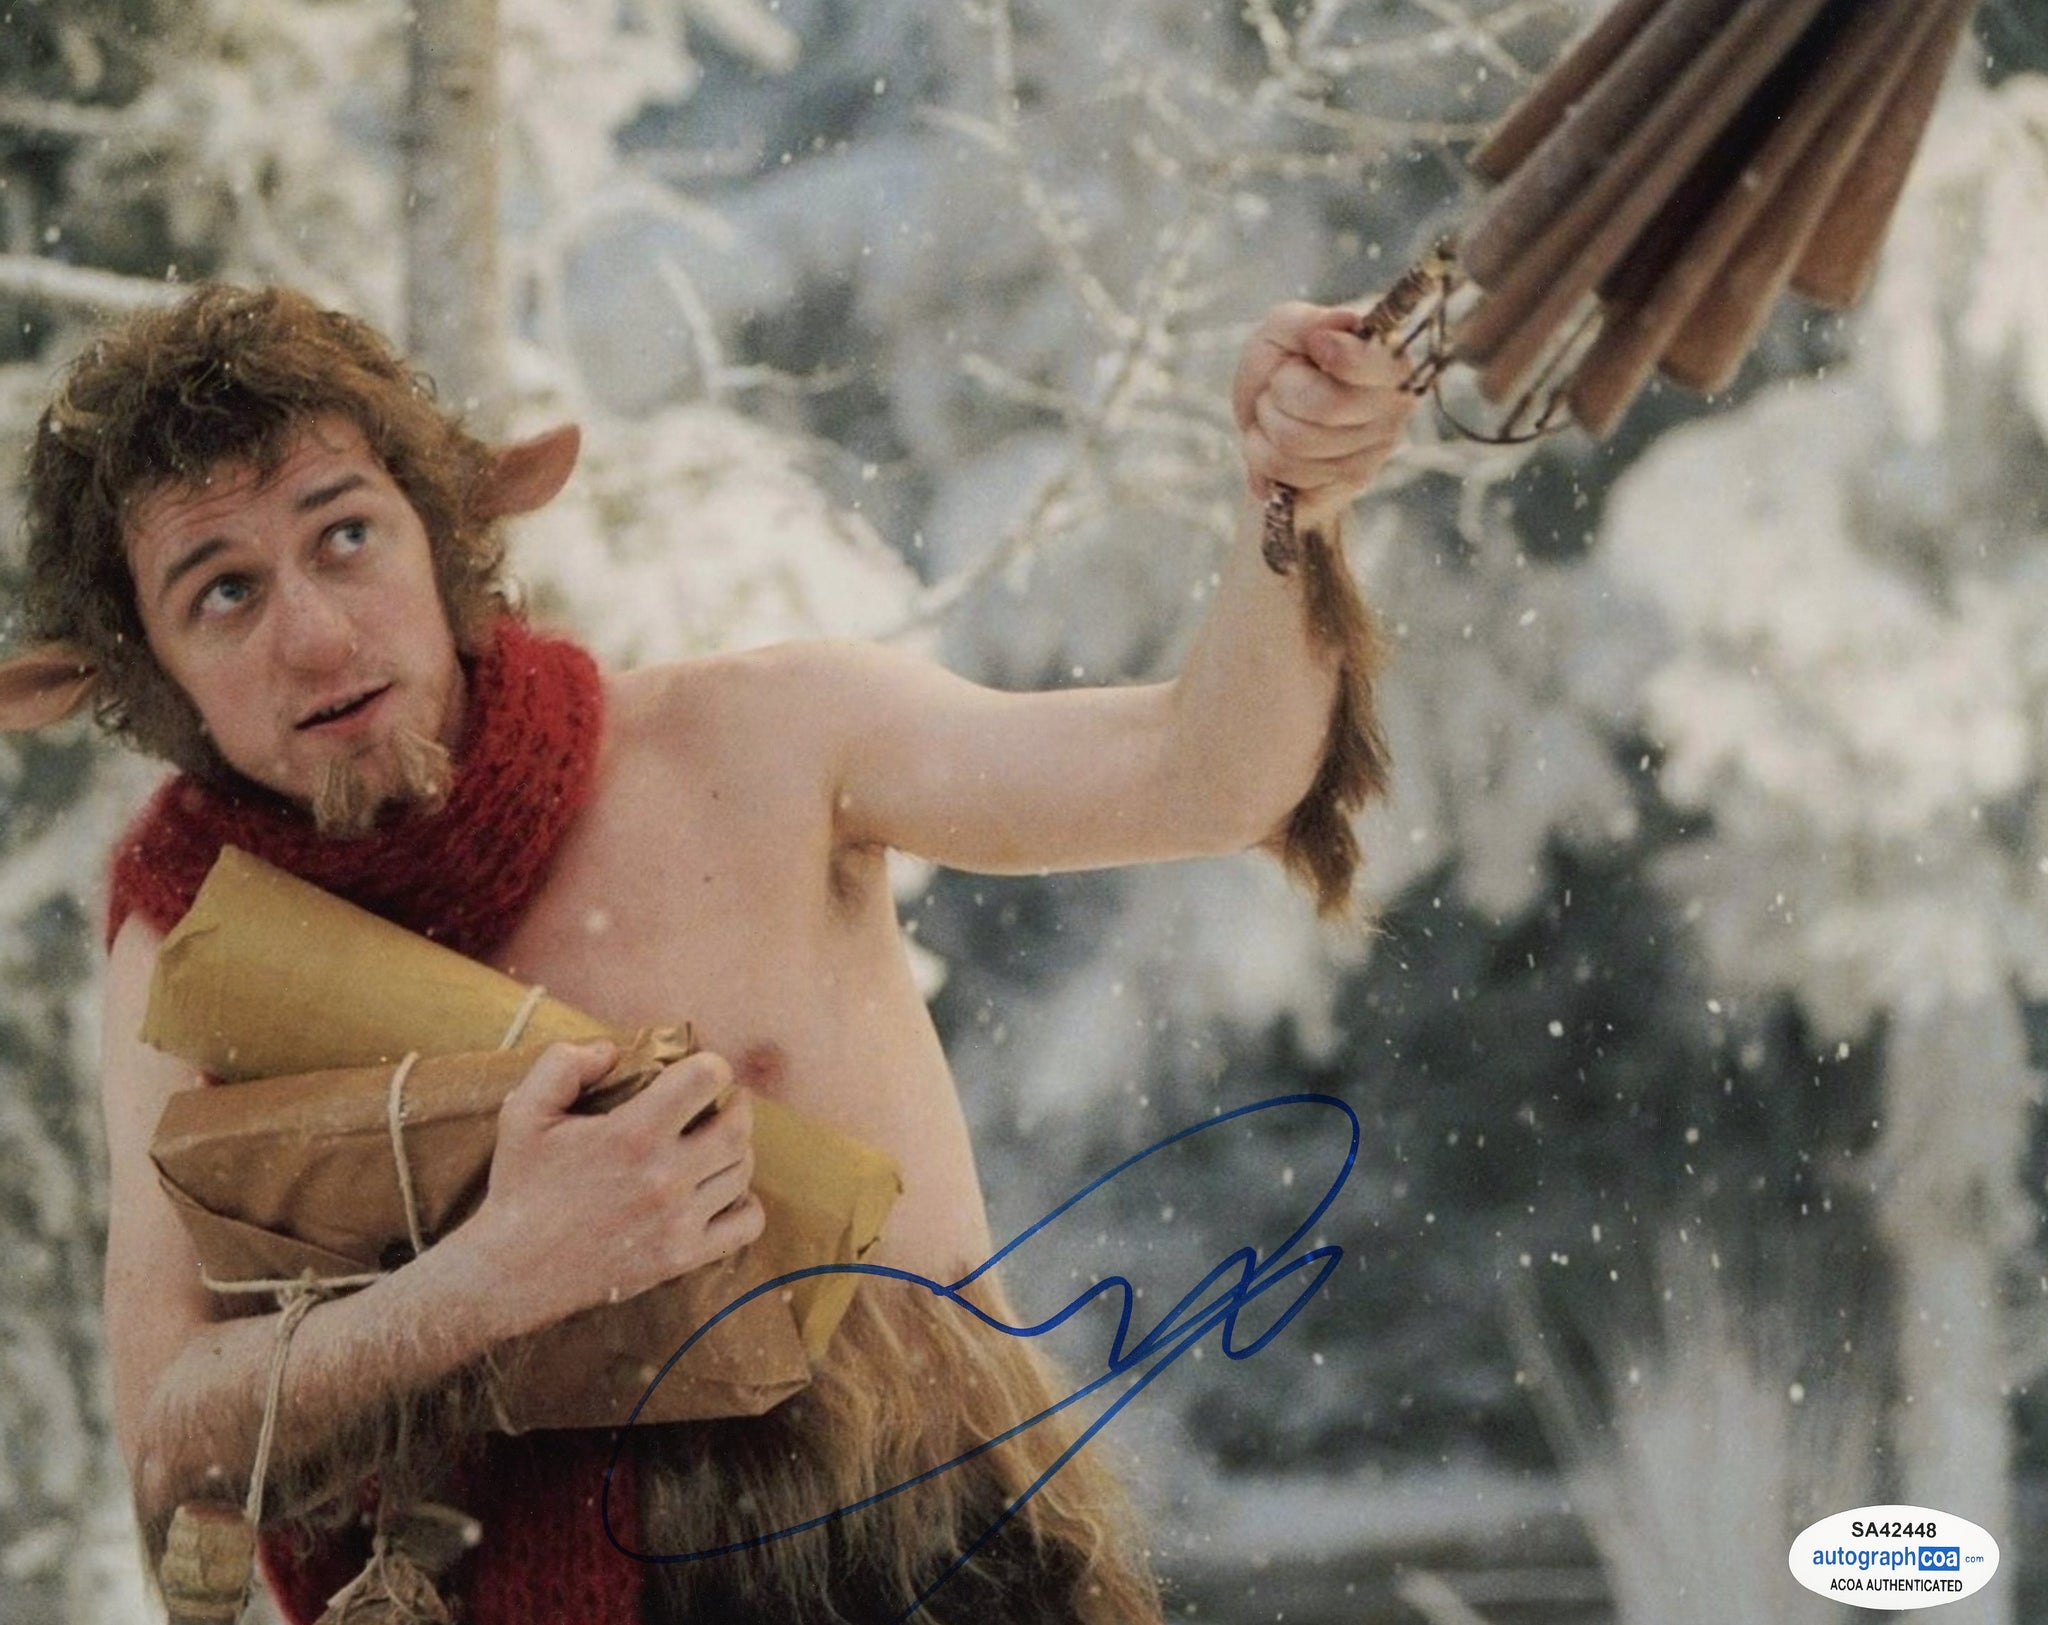 James McAvoy Chronicles of Narnia Signed Autograph 8x10 Photo ACOA #2 - Outlaw Hobbies Authentic Autographs